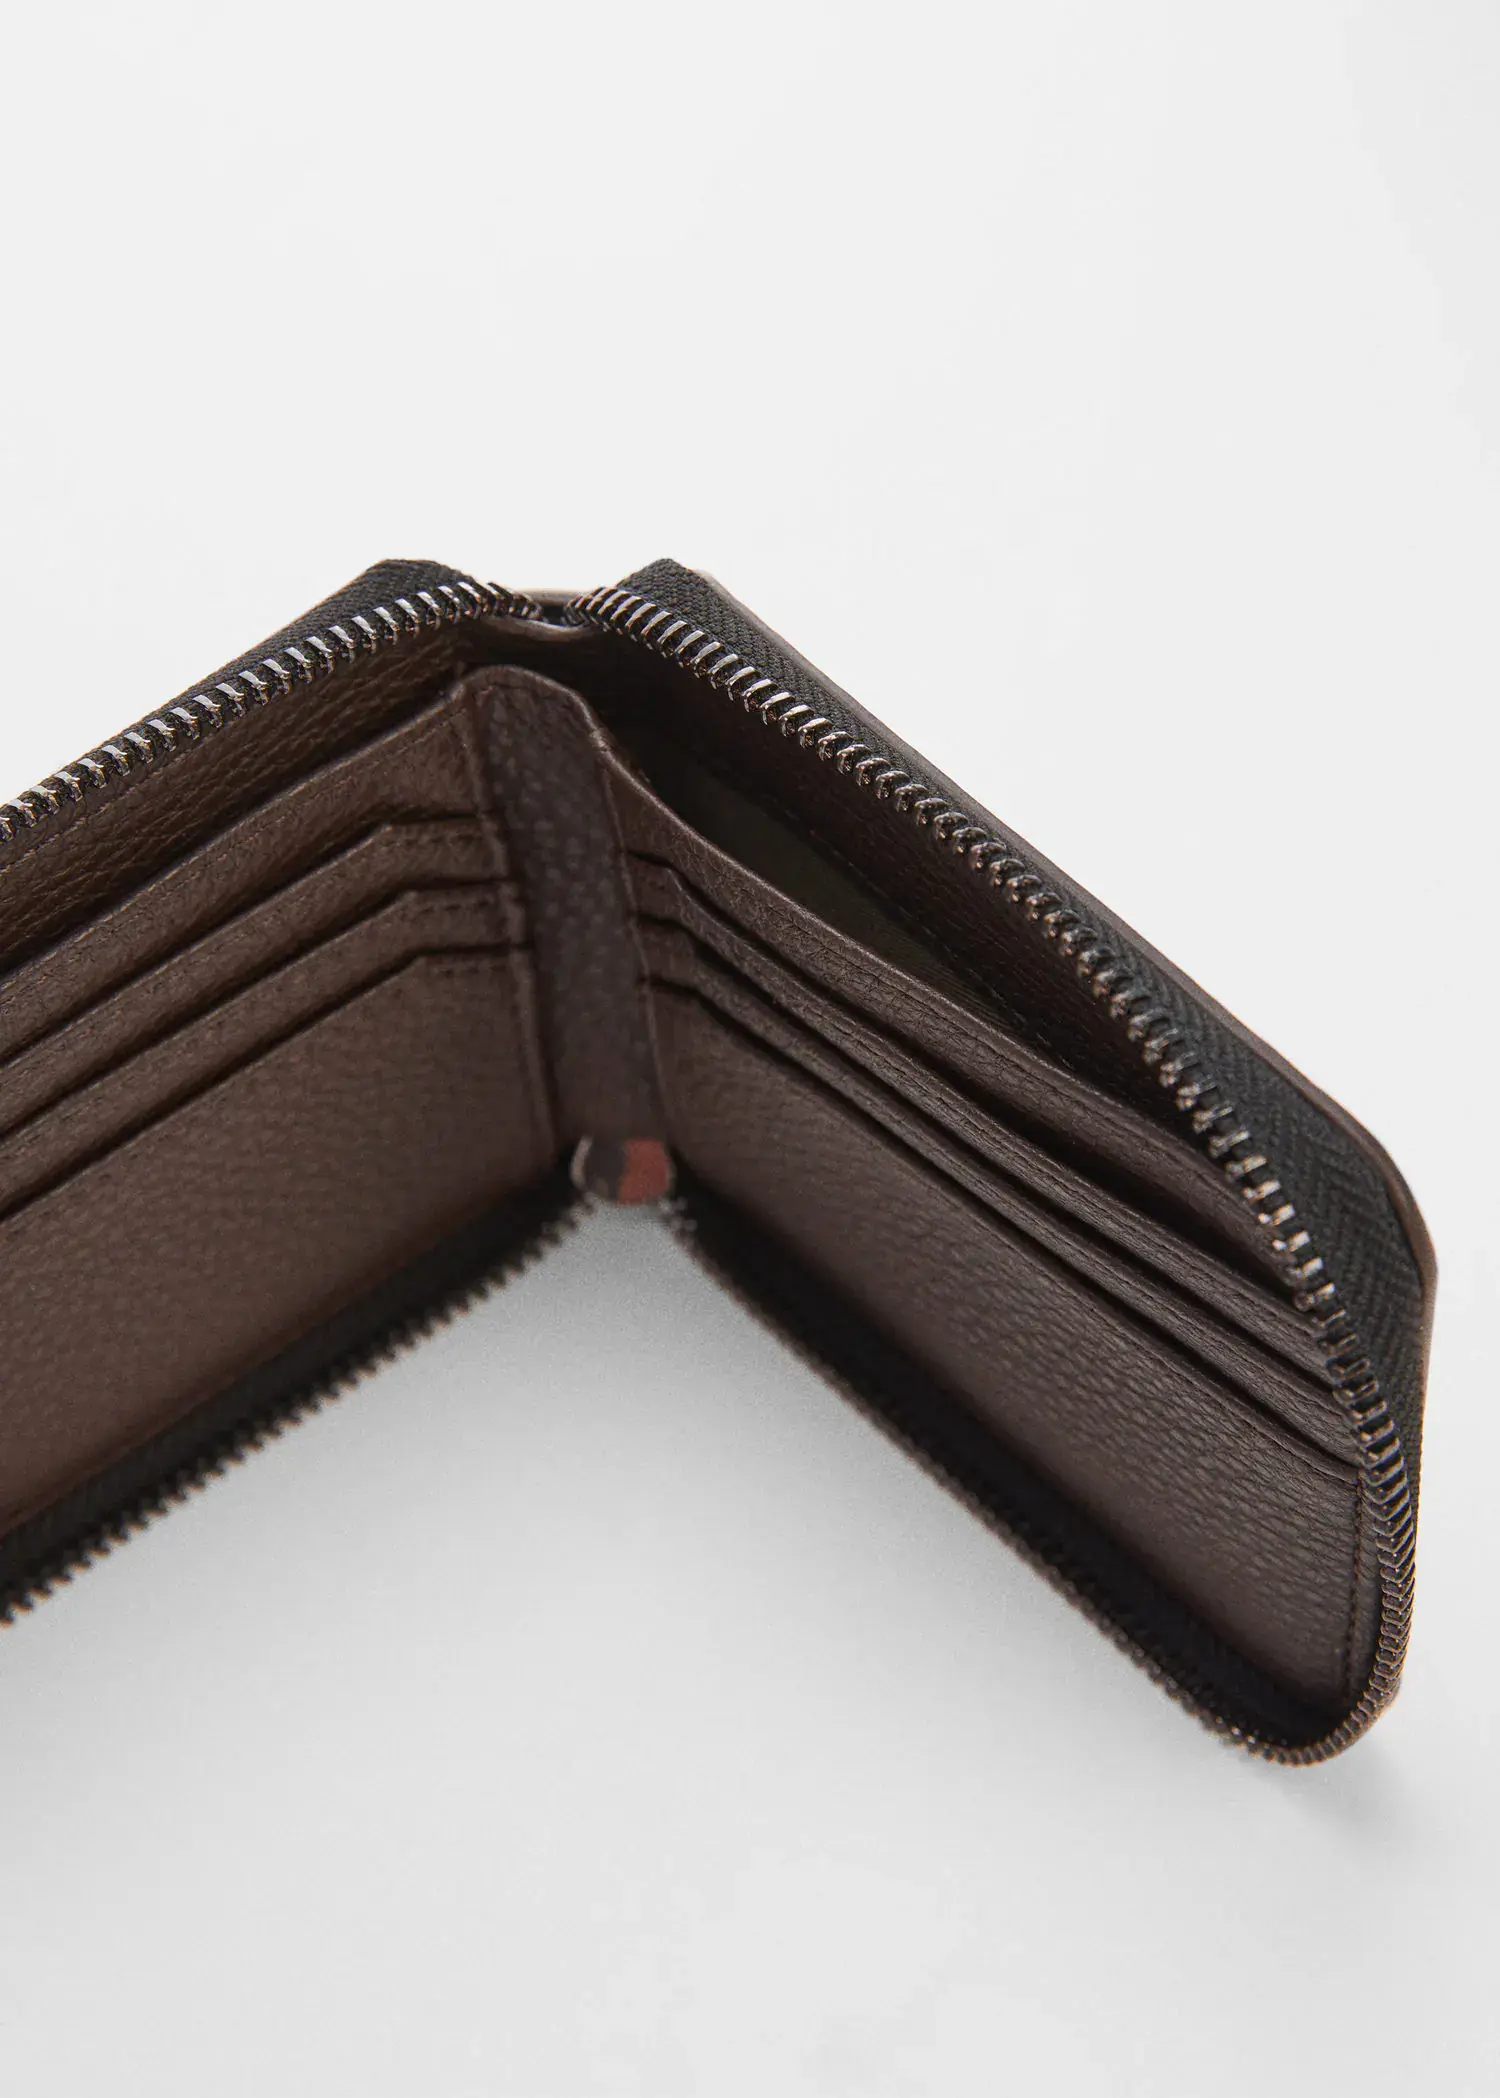 Mango Anti-contactless wallet. a close-up of the inside of a brown wallet. 